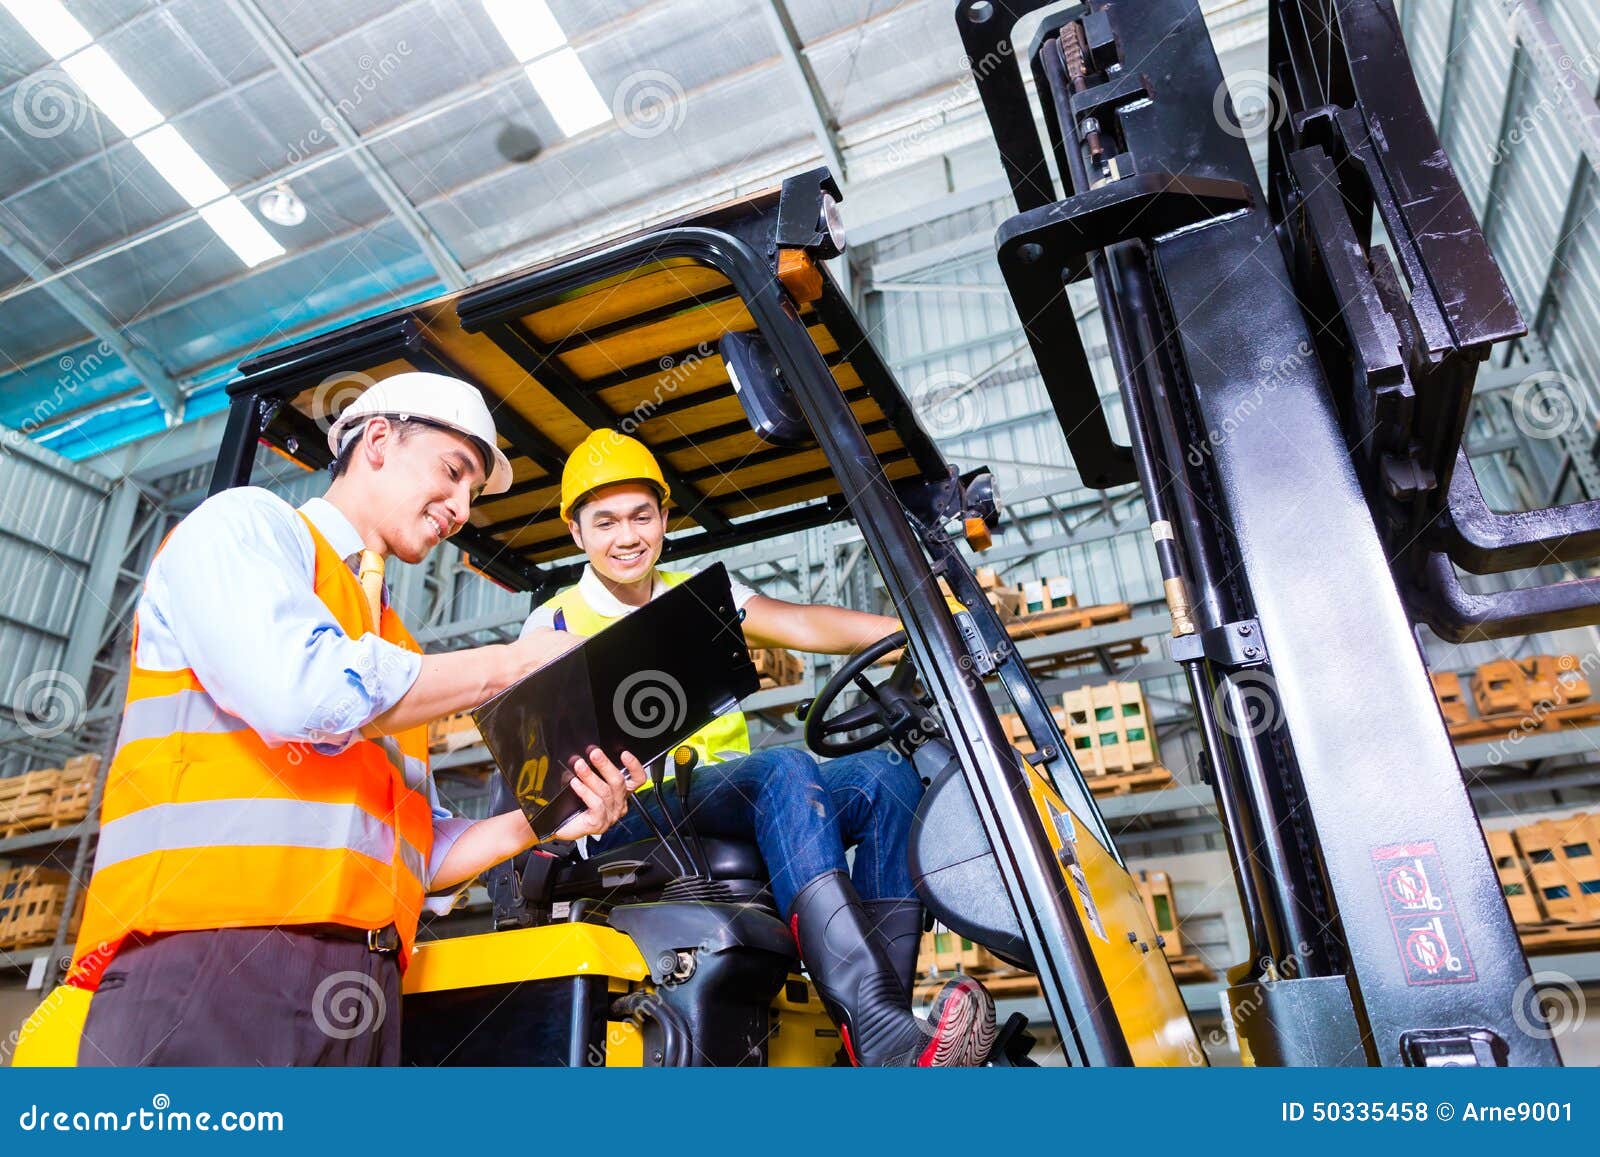 asian lift truck driver and foreman in storage